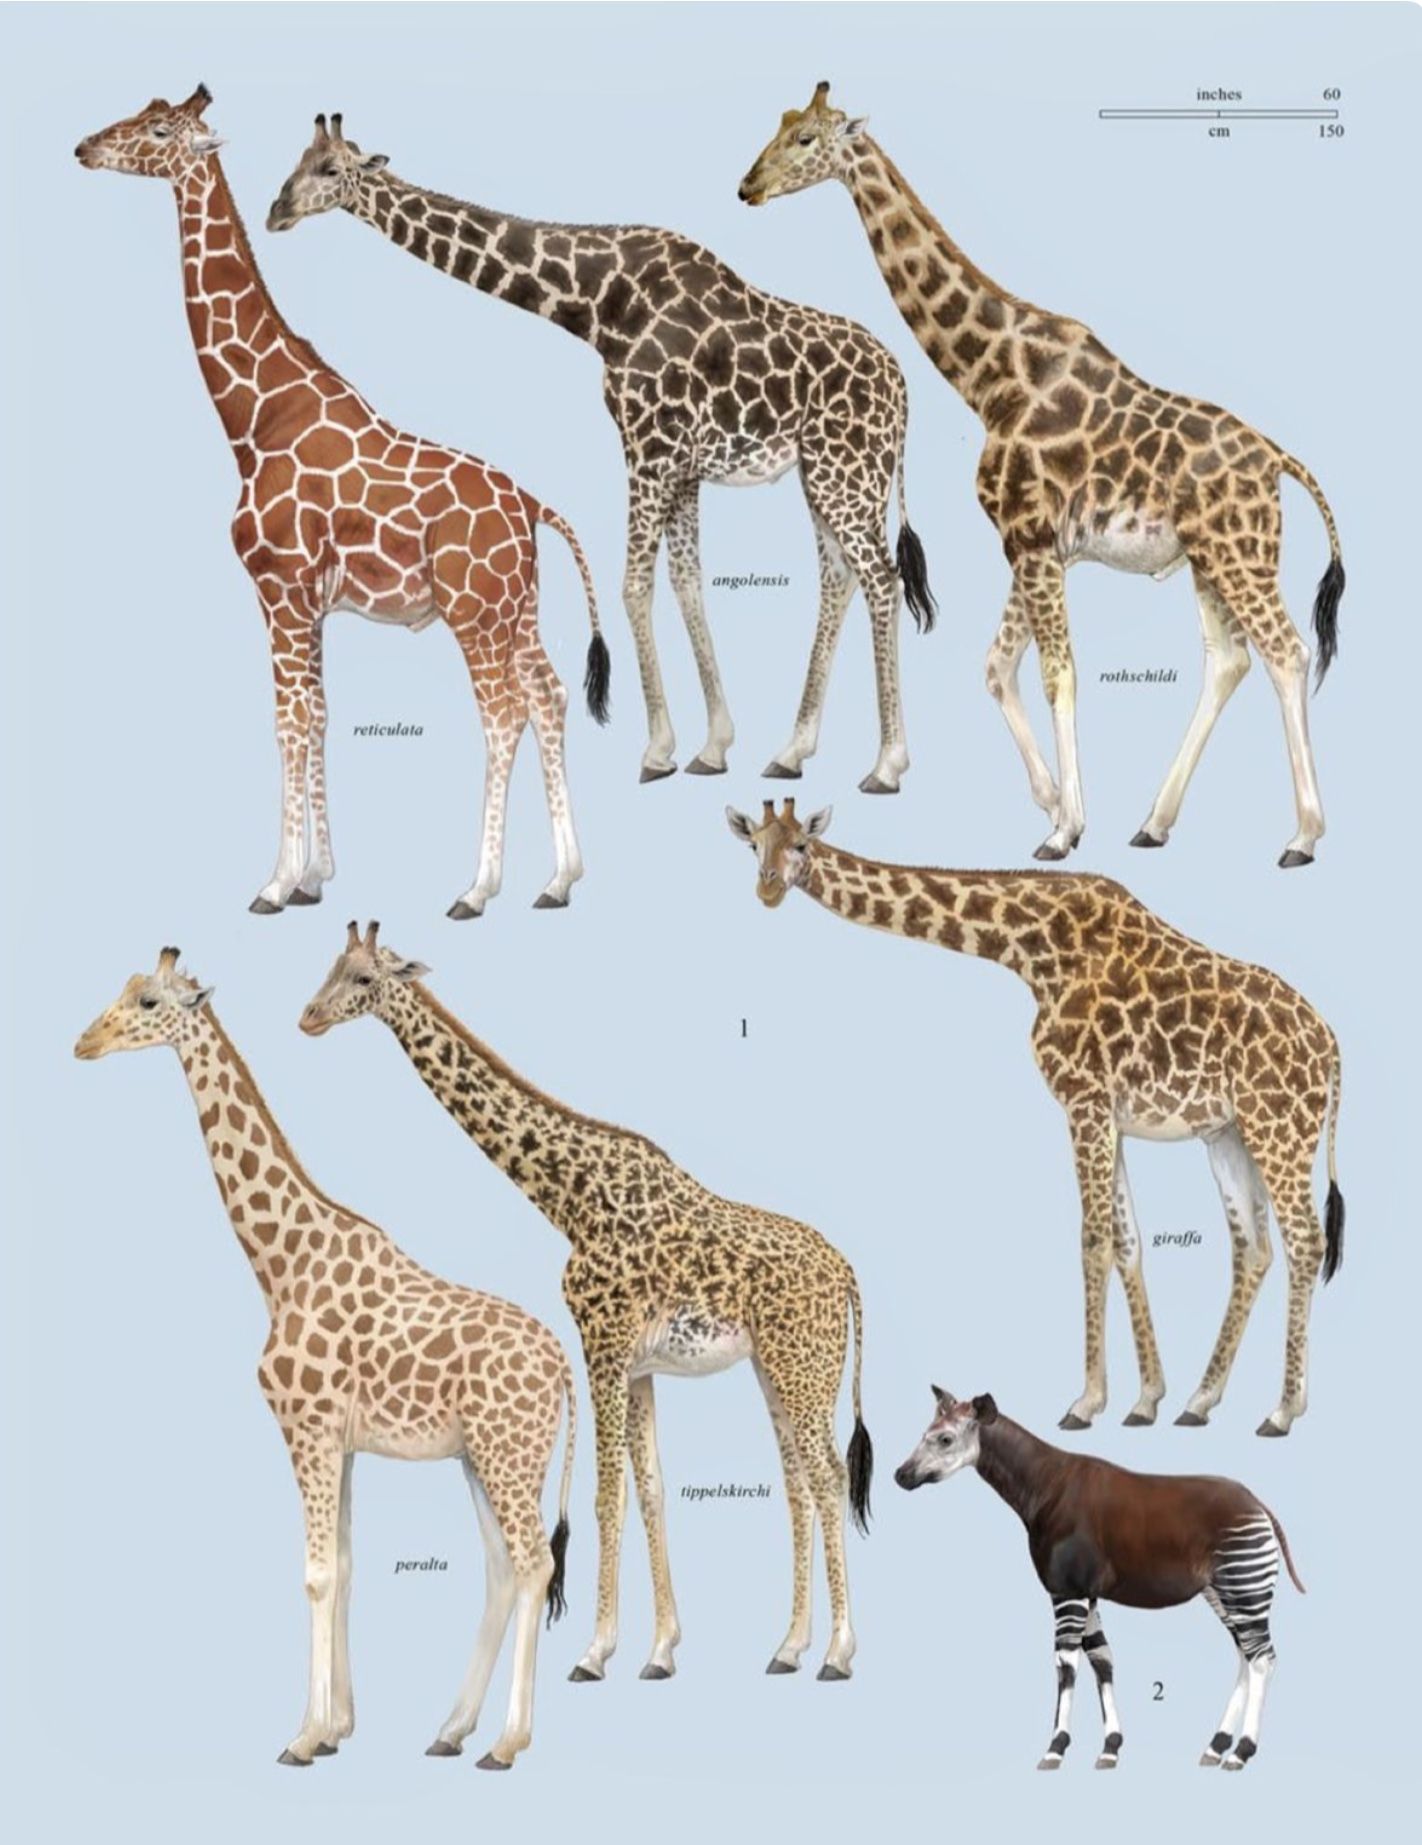 How many species of giraffes are there in the world?